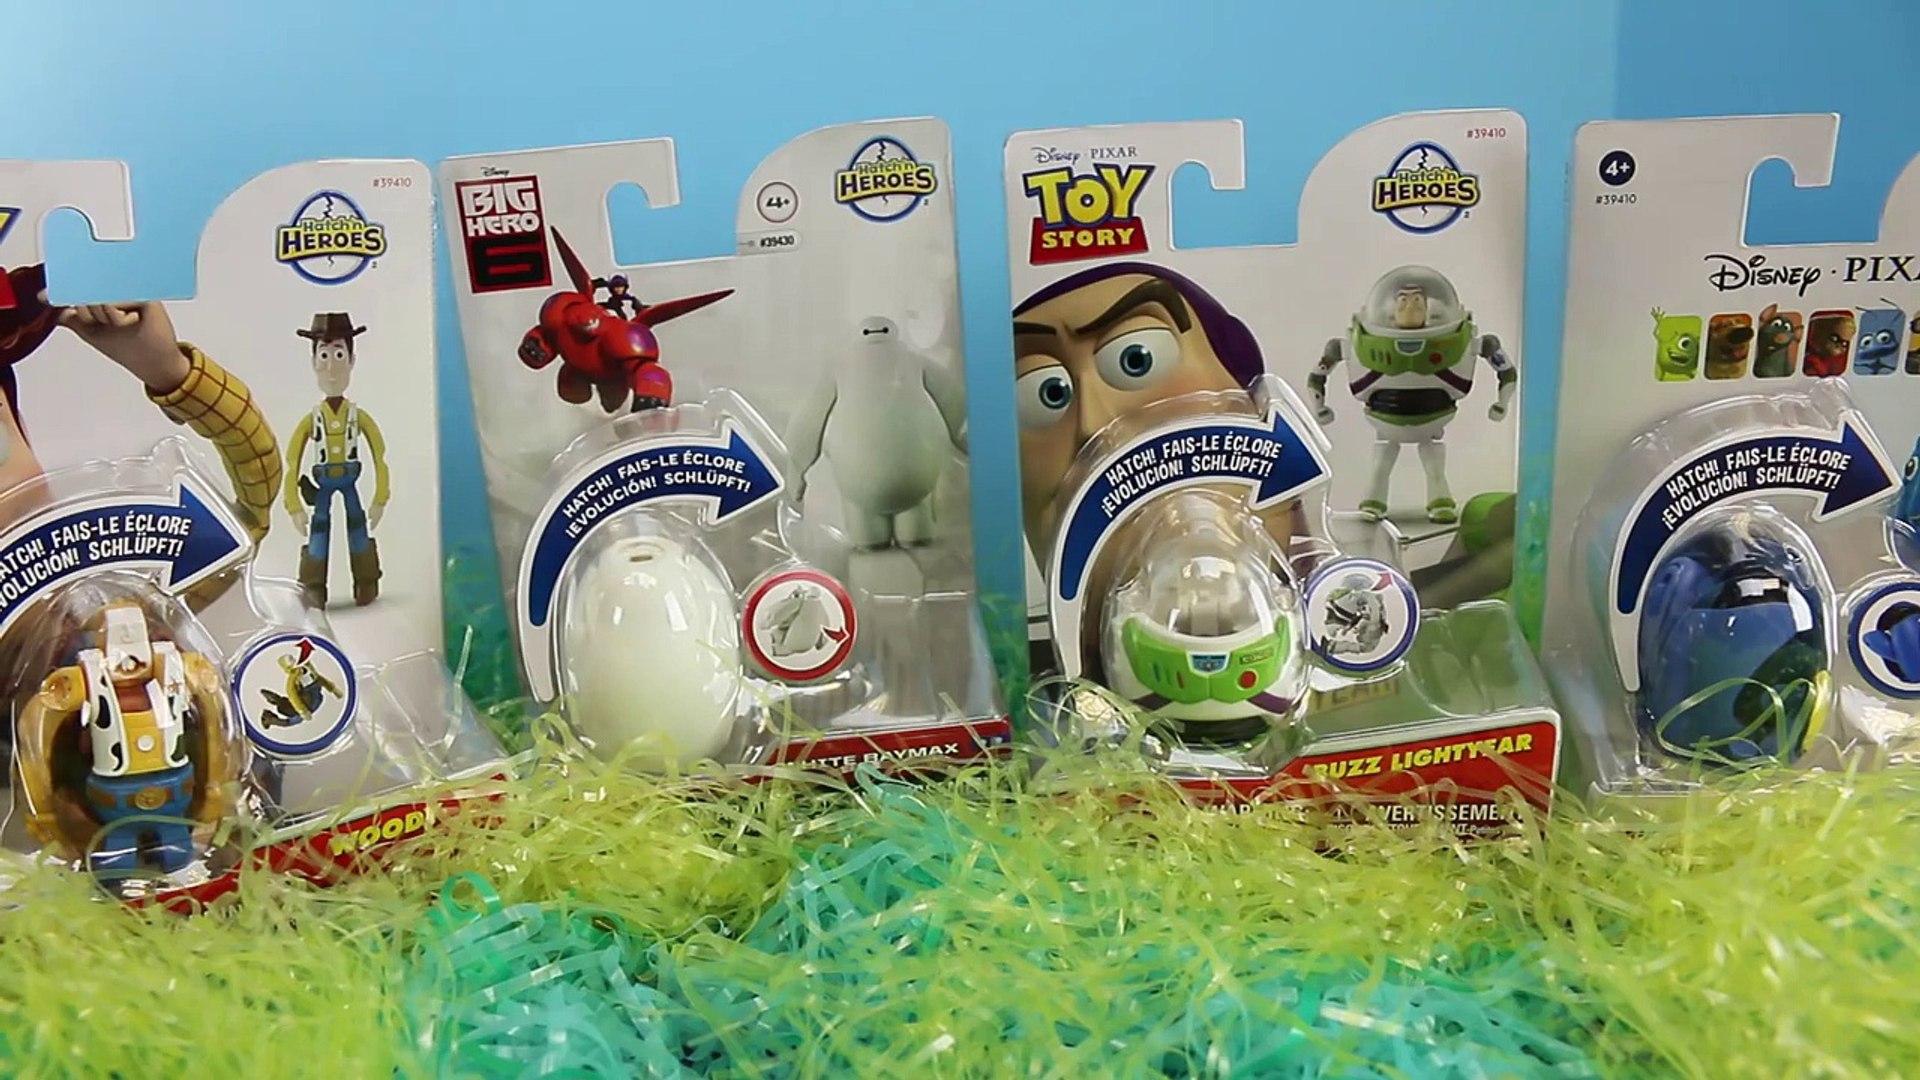 Hatch N Heroes Surprise Eggs with Toy Story Buzz Lightyear and Finding Nemo with Big Hero 6 - Dailymotion